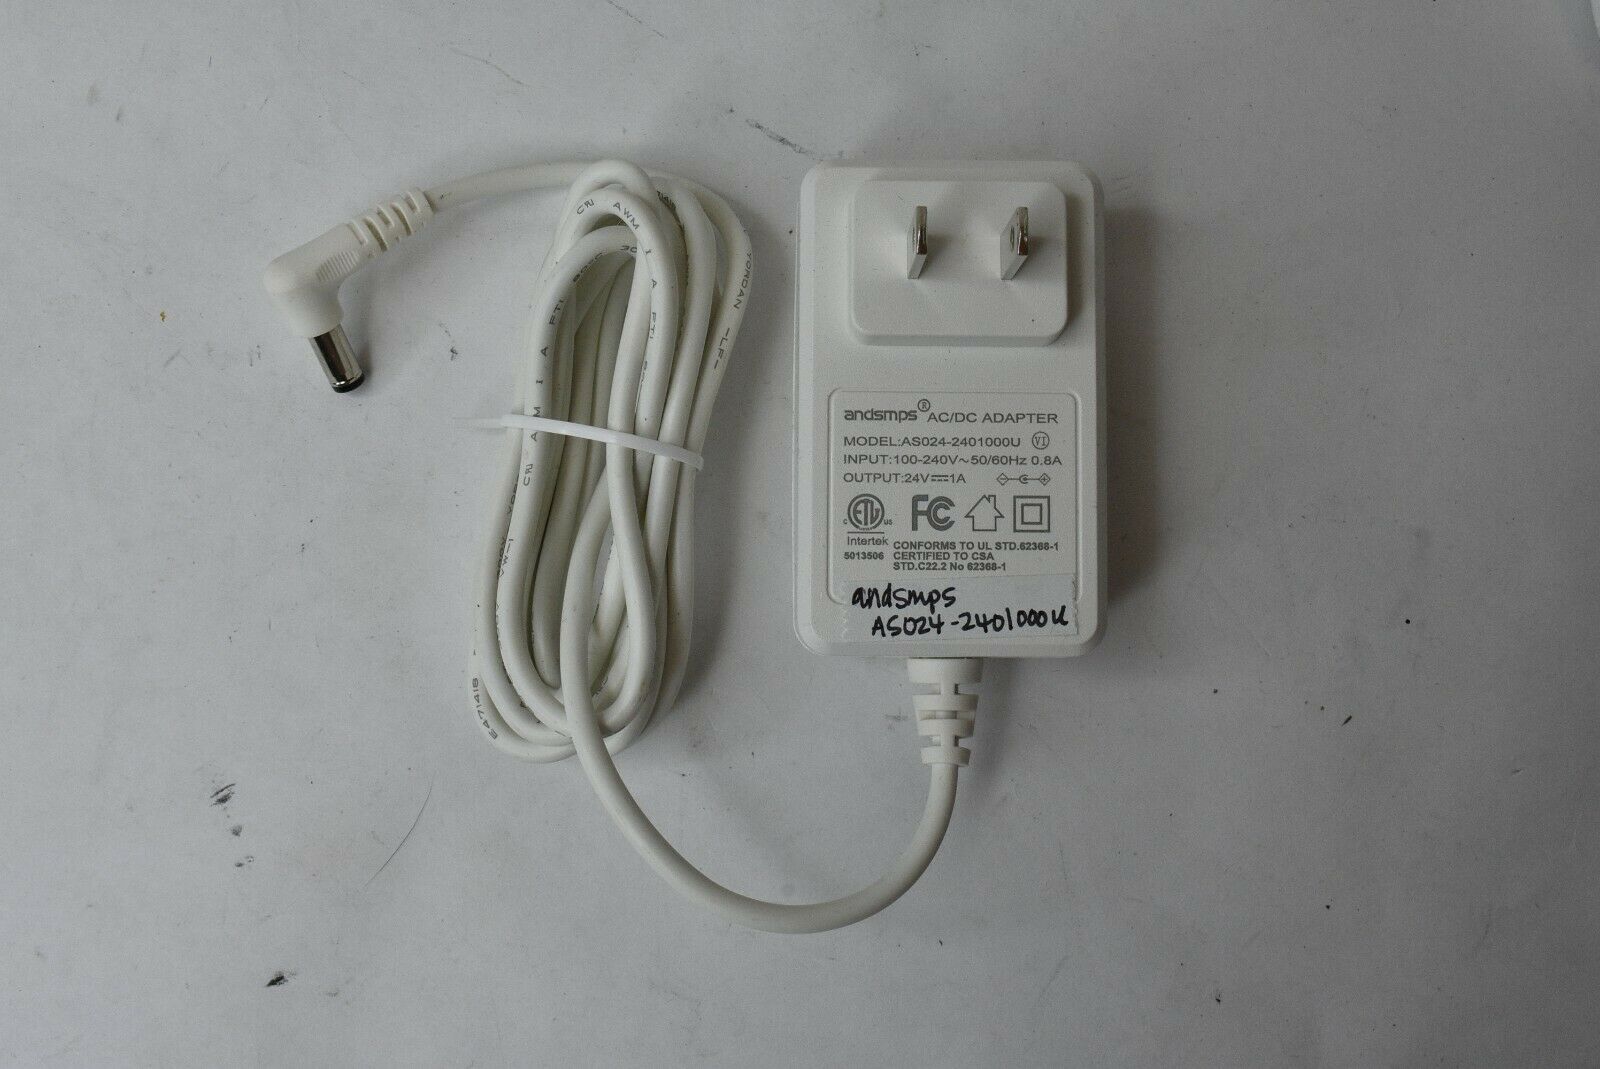 Andsmps AC/DC Adapter Power Supply Unit AS024-2401000U 24V 1A Type: AC/DC Adapter Output Voltage: 24 V Brand: And